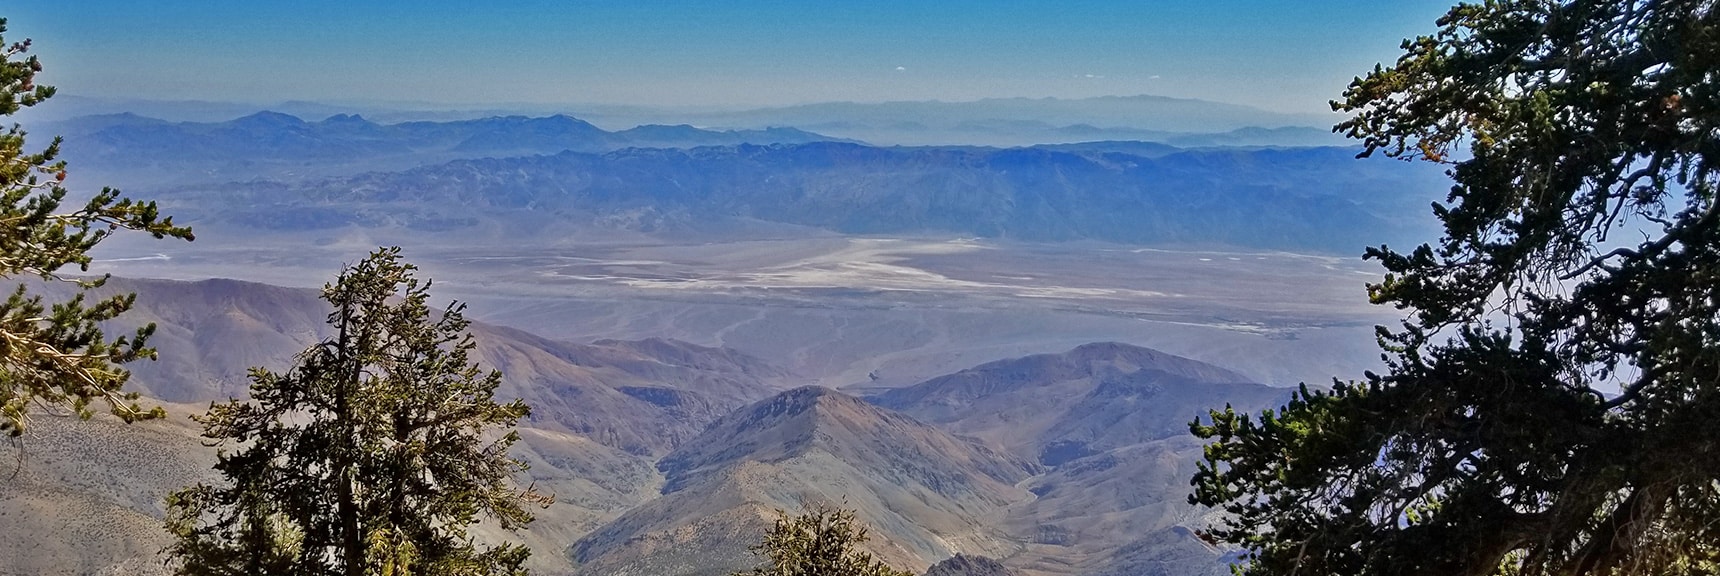 Another View to Death Valley Floor. Mt. Charleston Wilderness Very Faint on Horizon | Telescope Peak Summit from Wildrose Charcoal Kilns Parking Area, Panamint Mountains, Death Valley National Park, California